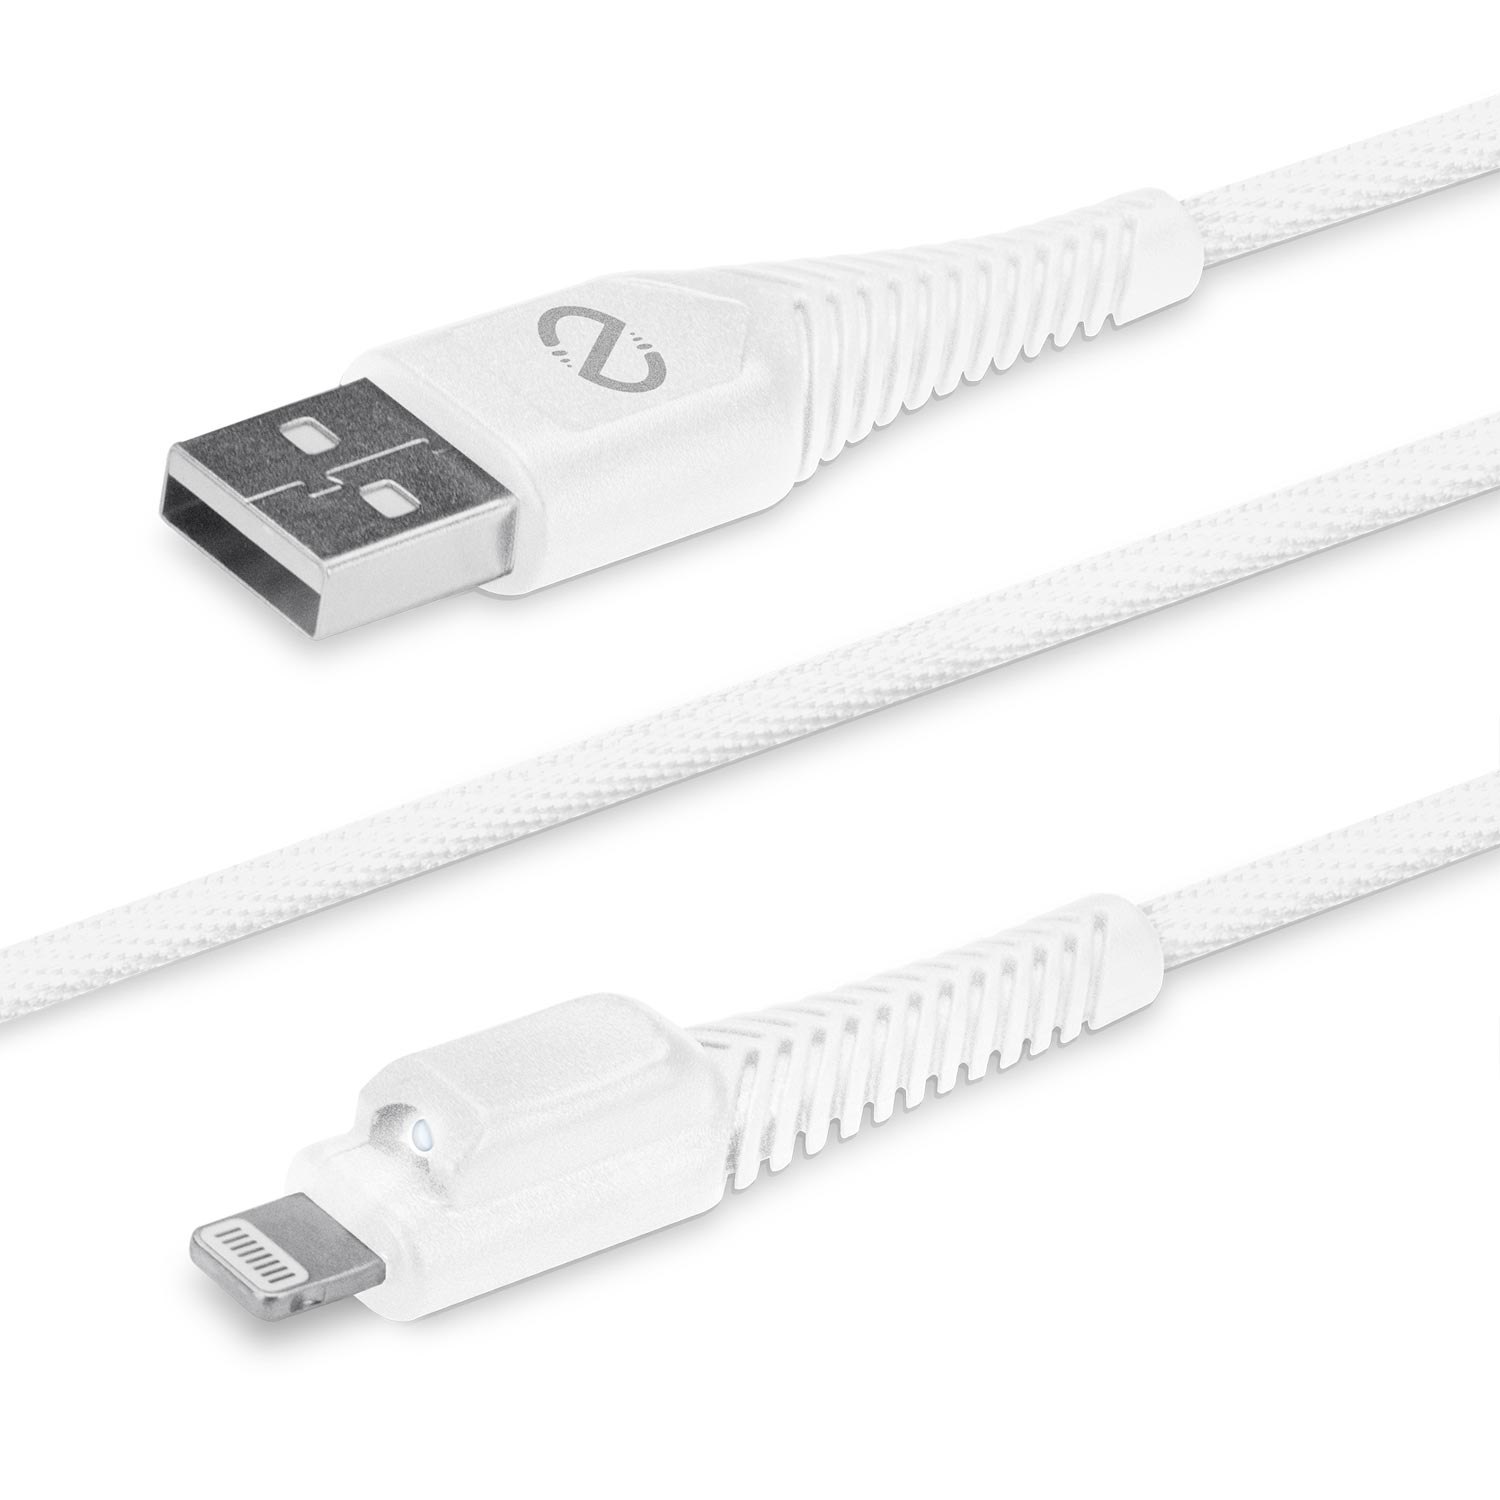 Rugged LED MFI USB Charge/Sync Cable 4ft